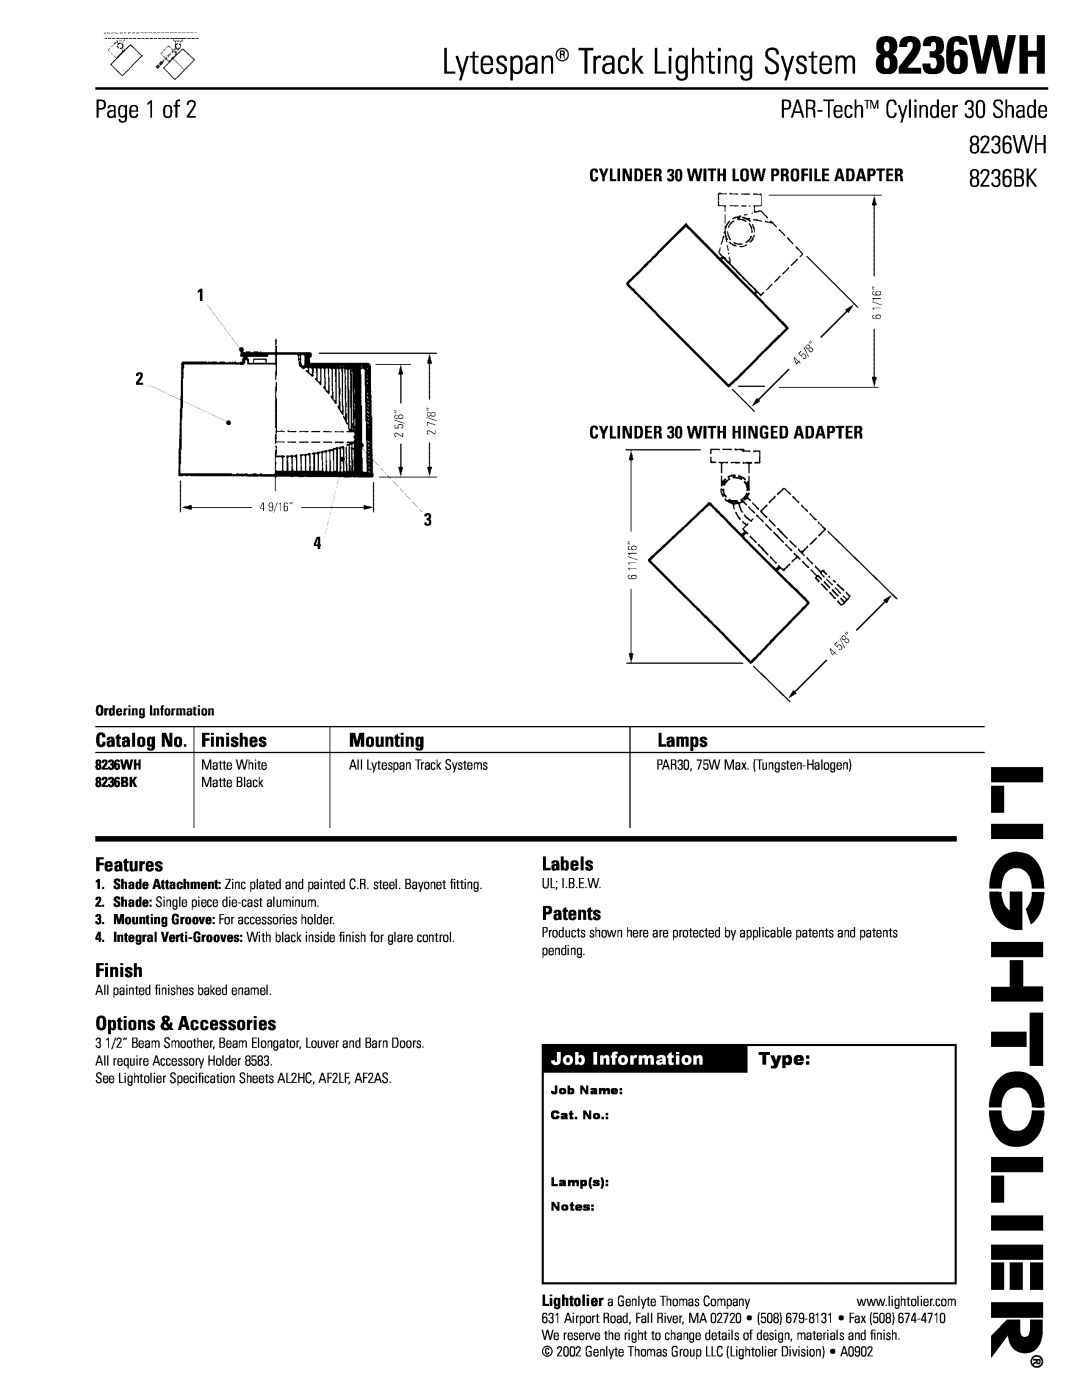 Lightolier 8236WH specifications Page 1 of, PAR-TechTM Cylinder 30 Shade, Finishes, Mounting, Lamps, Features, Labels 